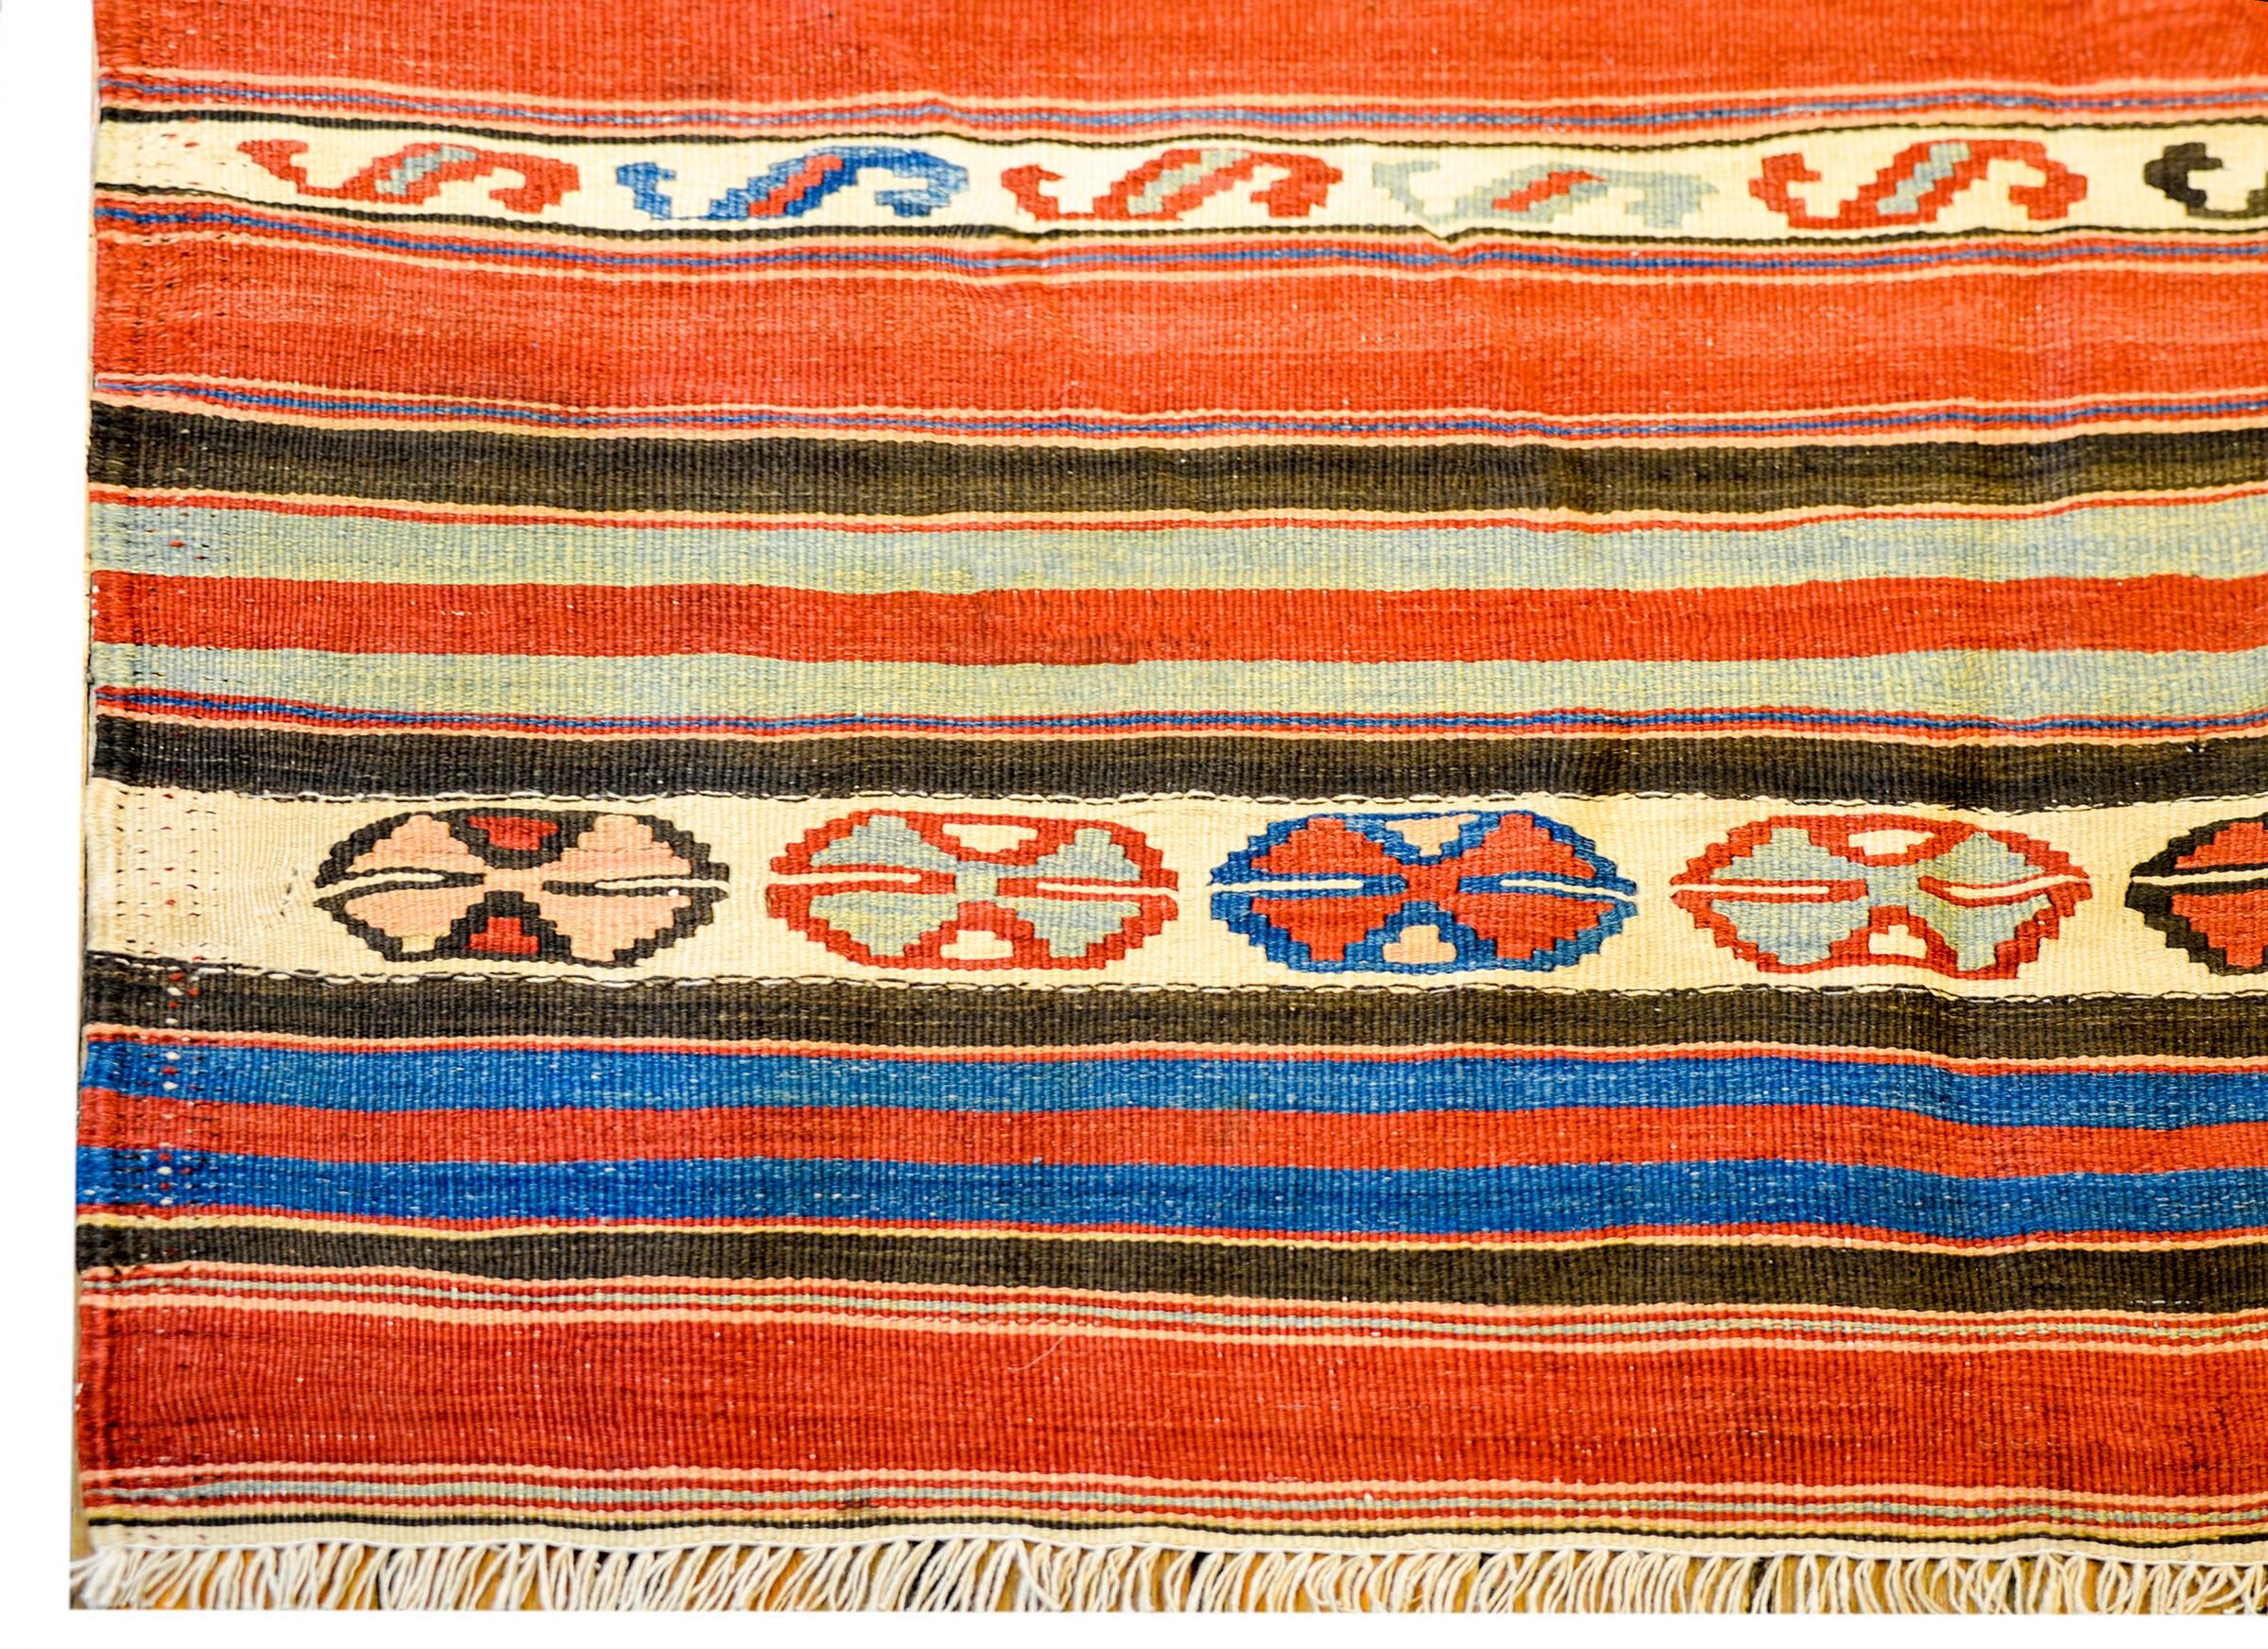 A wonderful early 20th century Persian Zarand Kilim runner with alternating boldly colored multicolored stripes of geometric and striped design. The border is thin, with a diamond and zigzag pattern.